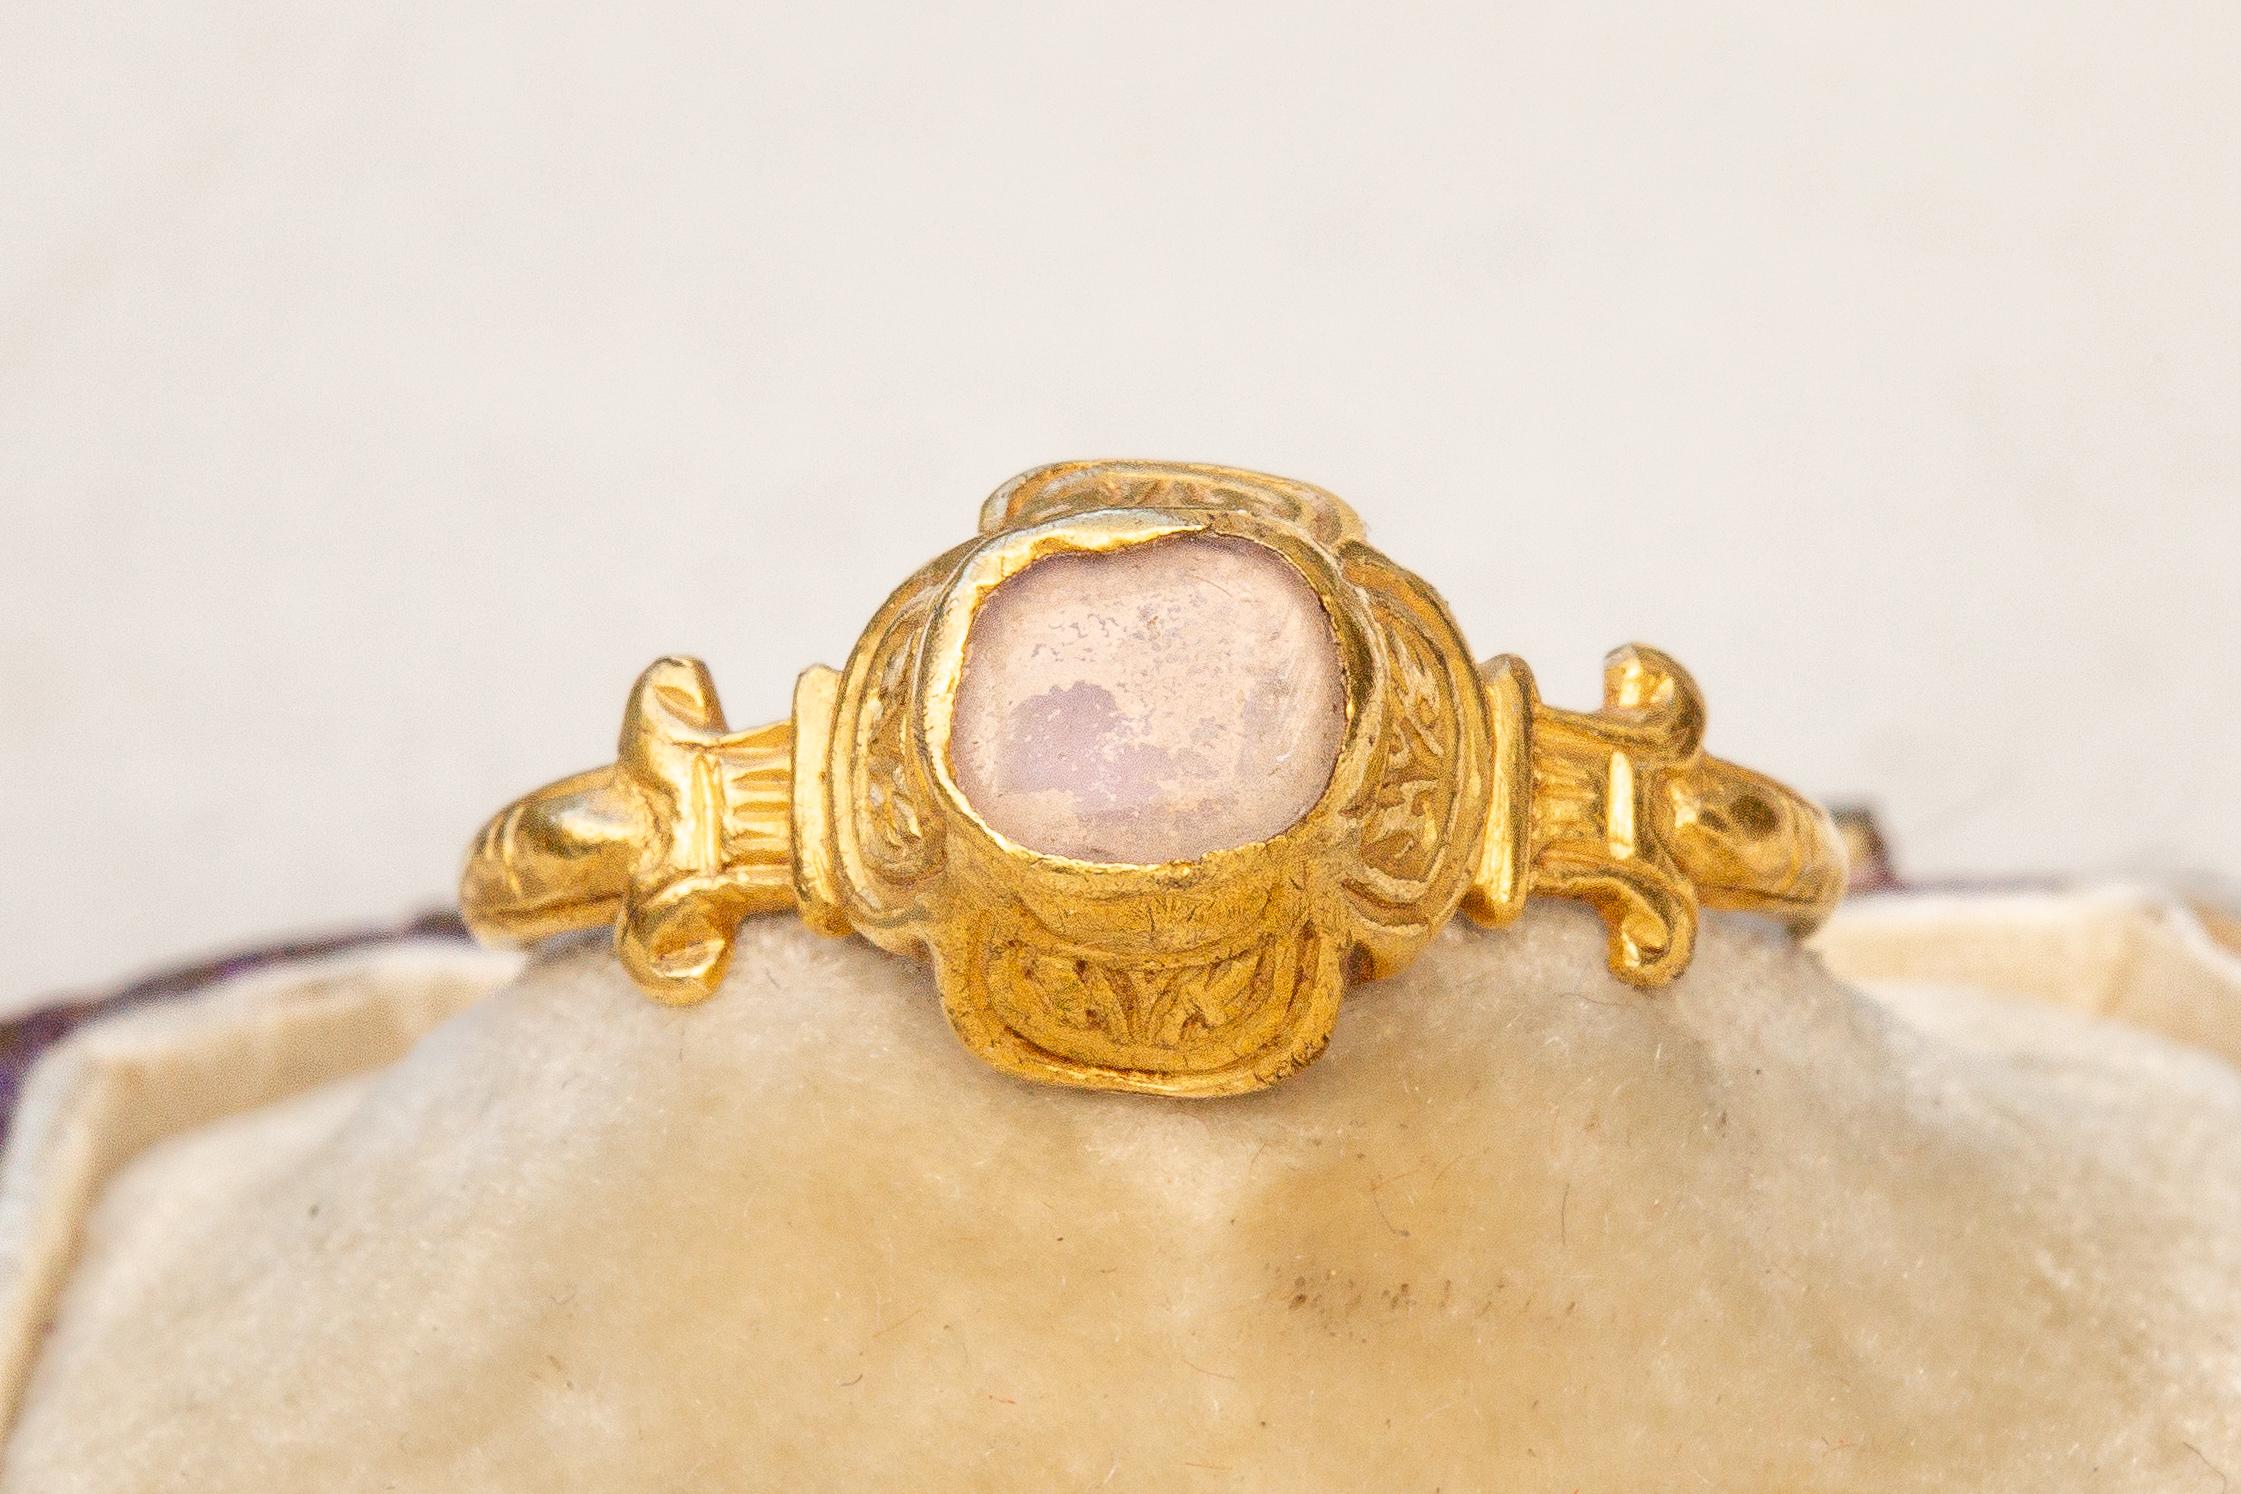 Scarce Renaissance 16th Century Rock Crystal Marriage Ring Medieval Middle Ages  For Sale 7